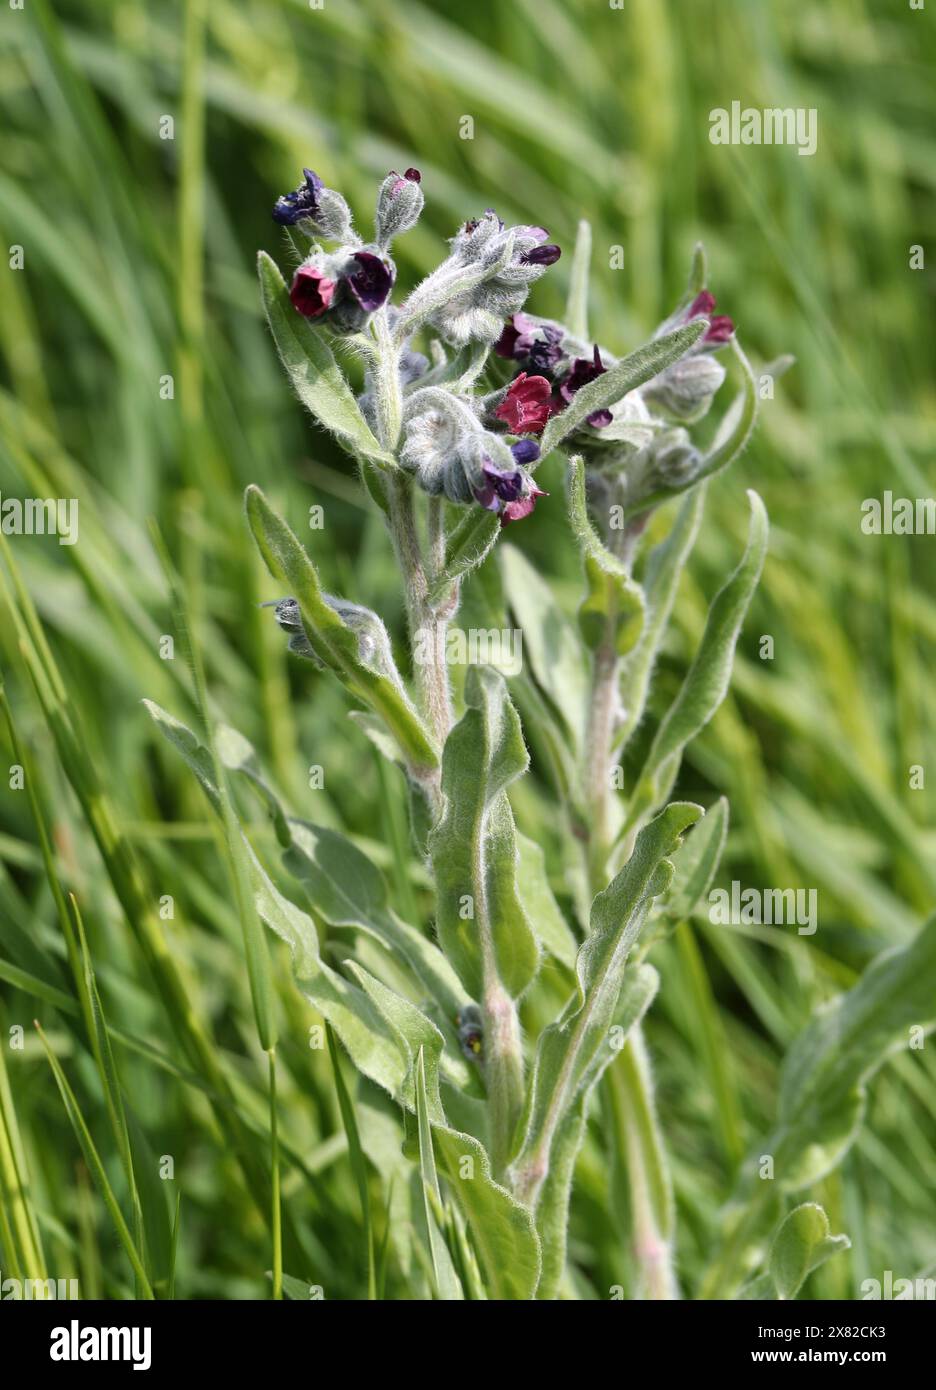 Houndstongue, Cynoglossum officinale, Boraginaceae. Aka houndstooth, dog's tongue, gypsy flower, and rats and mice (due to its smell). Stock Photo